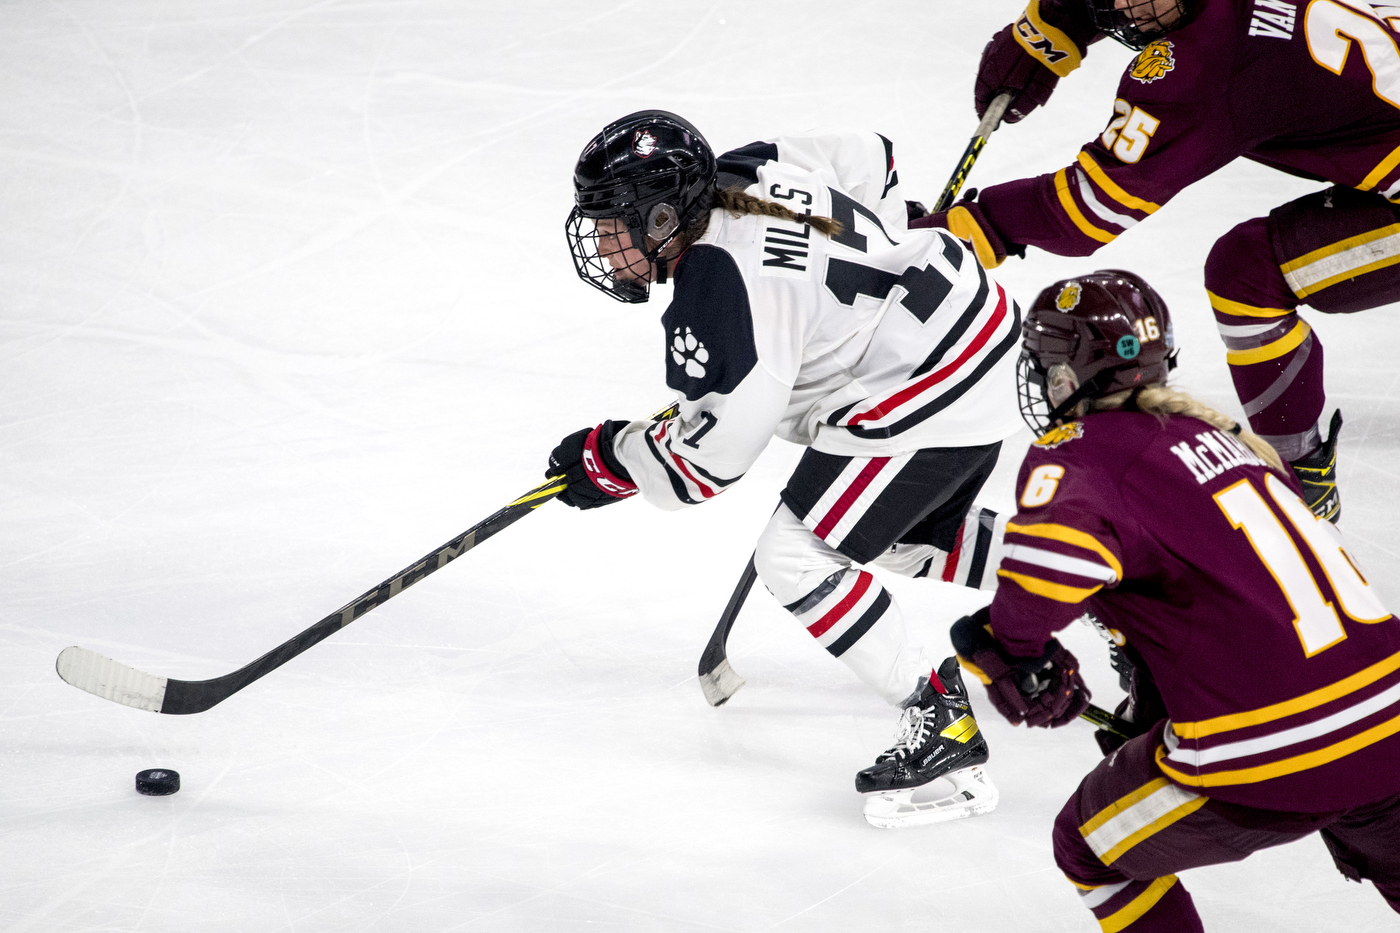 Maddie Mills pushes the puck for Northeastern.